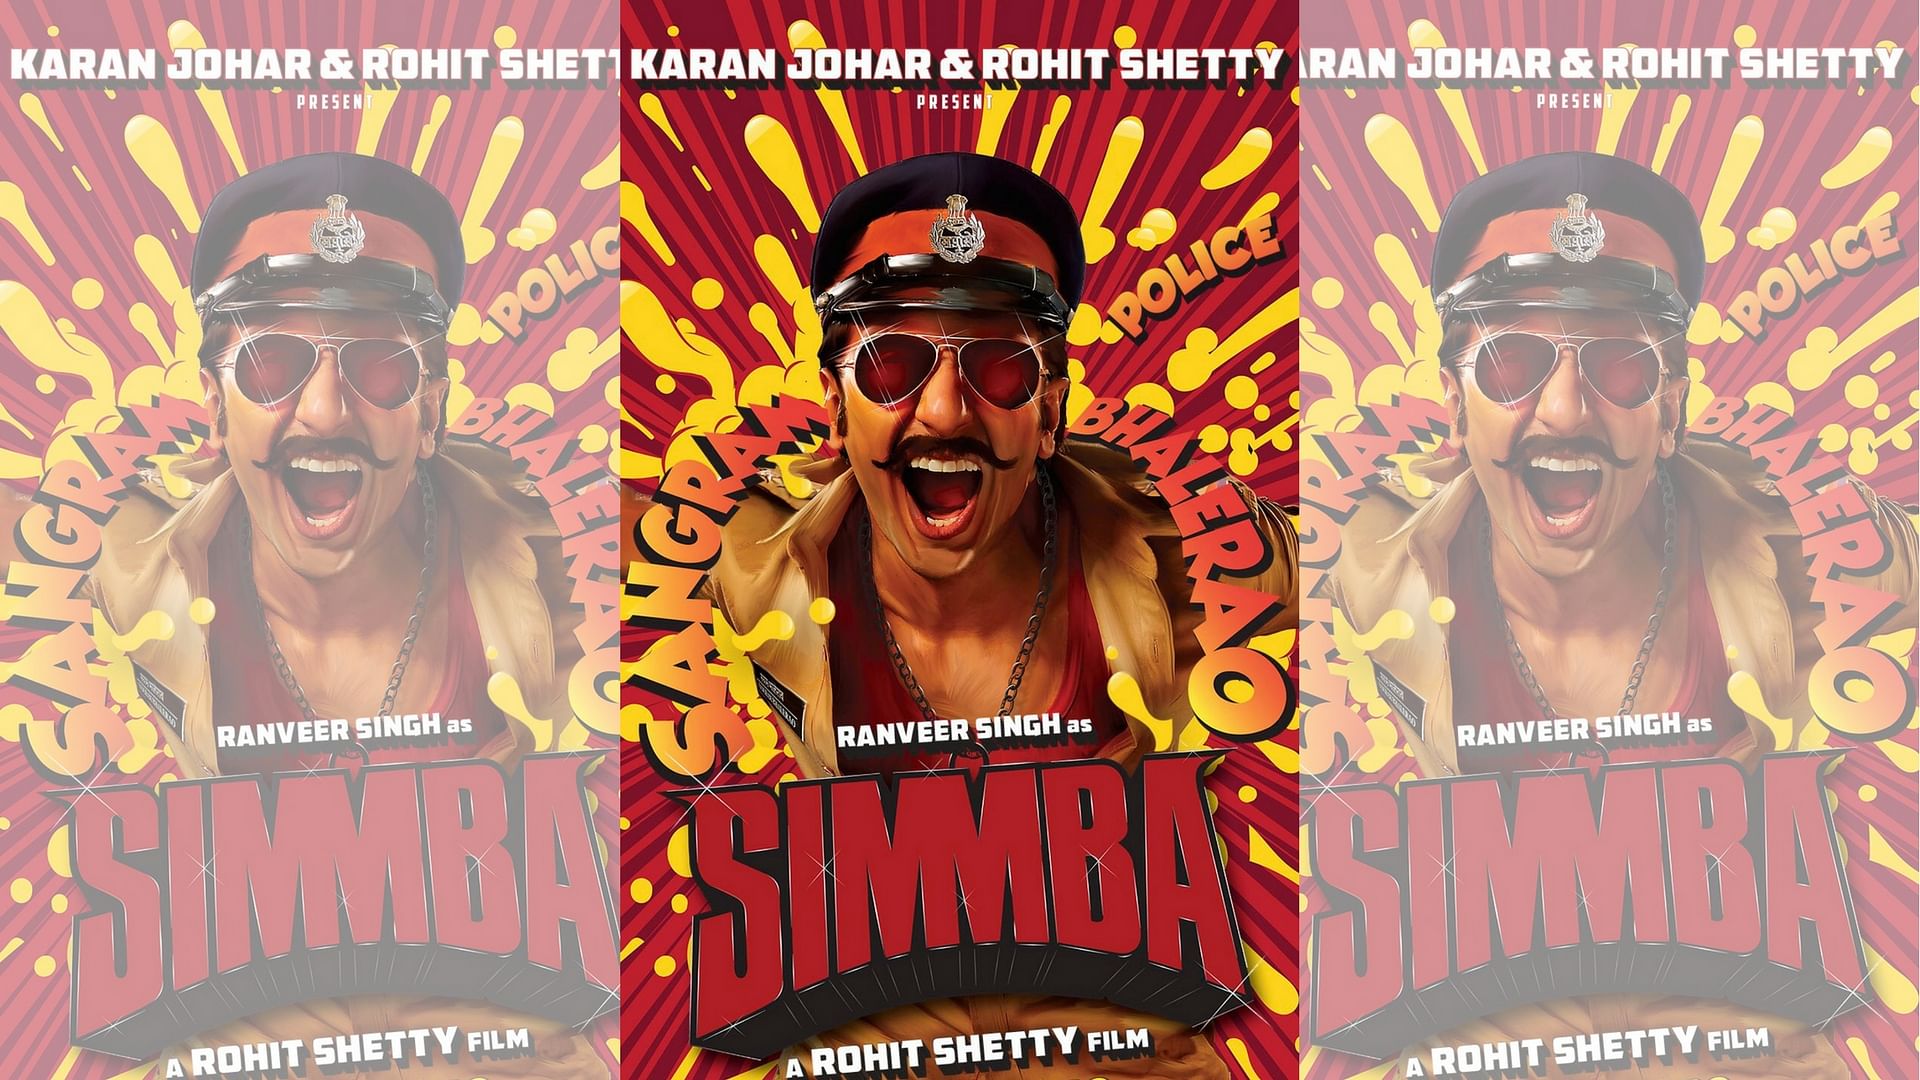 Ranveer Singh in and as <i>Simmba.</i>